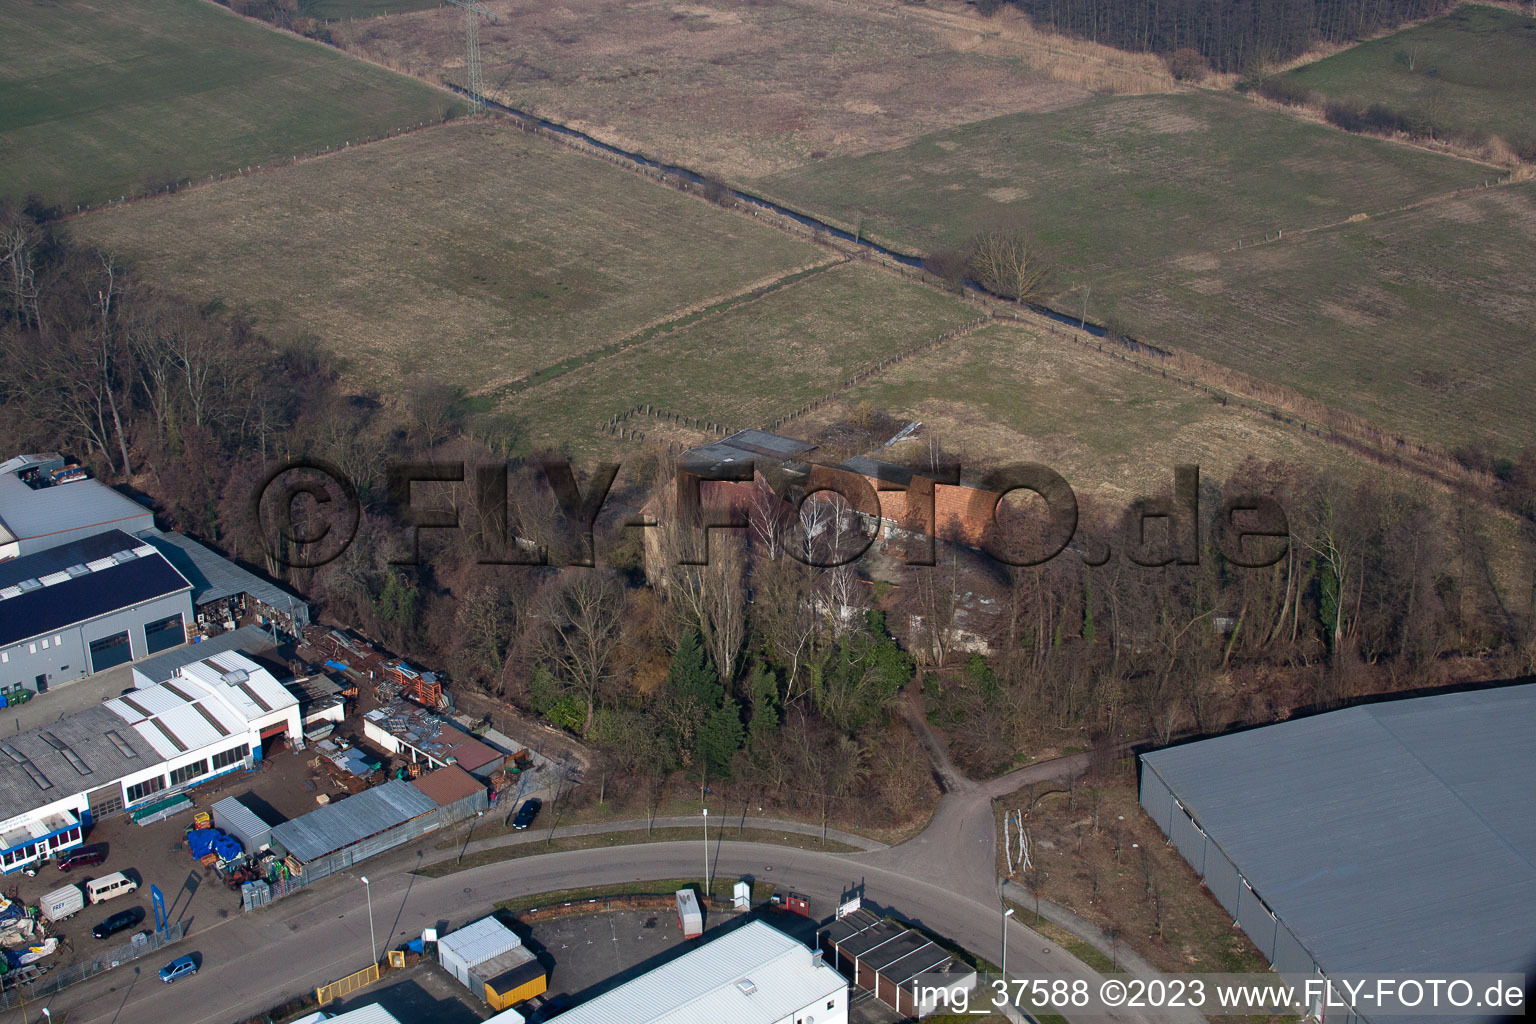 Drone recording of Barthelsmühle in the district Minderslachen in Kandel in the state Rhineland-Palatinate, Germany